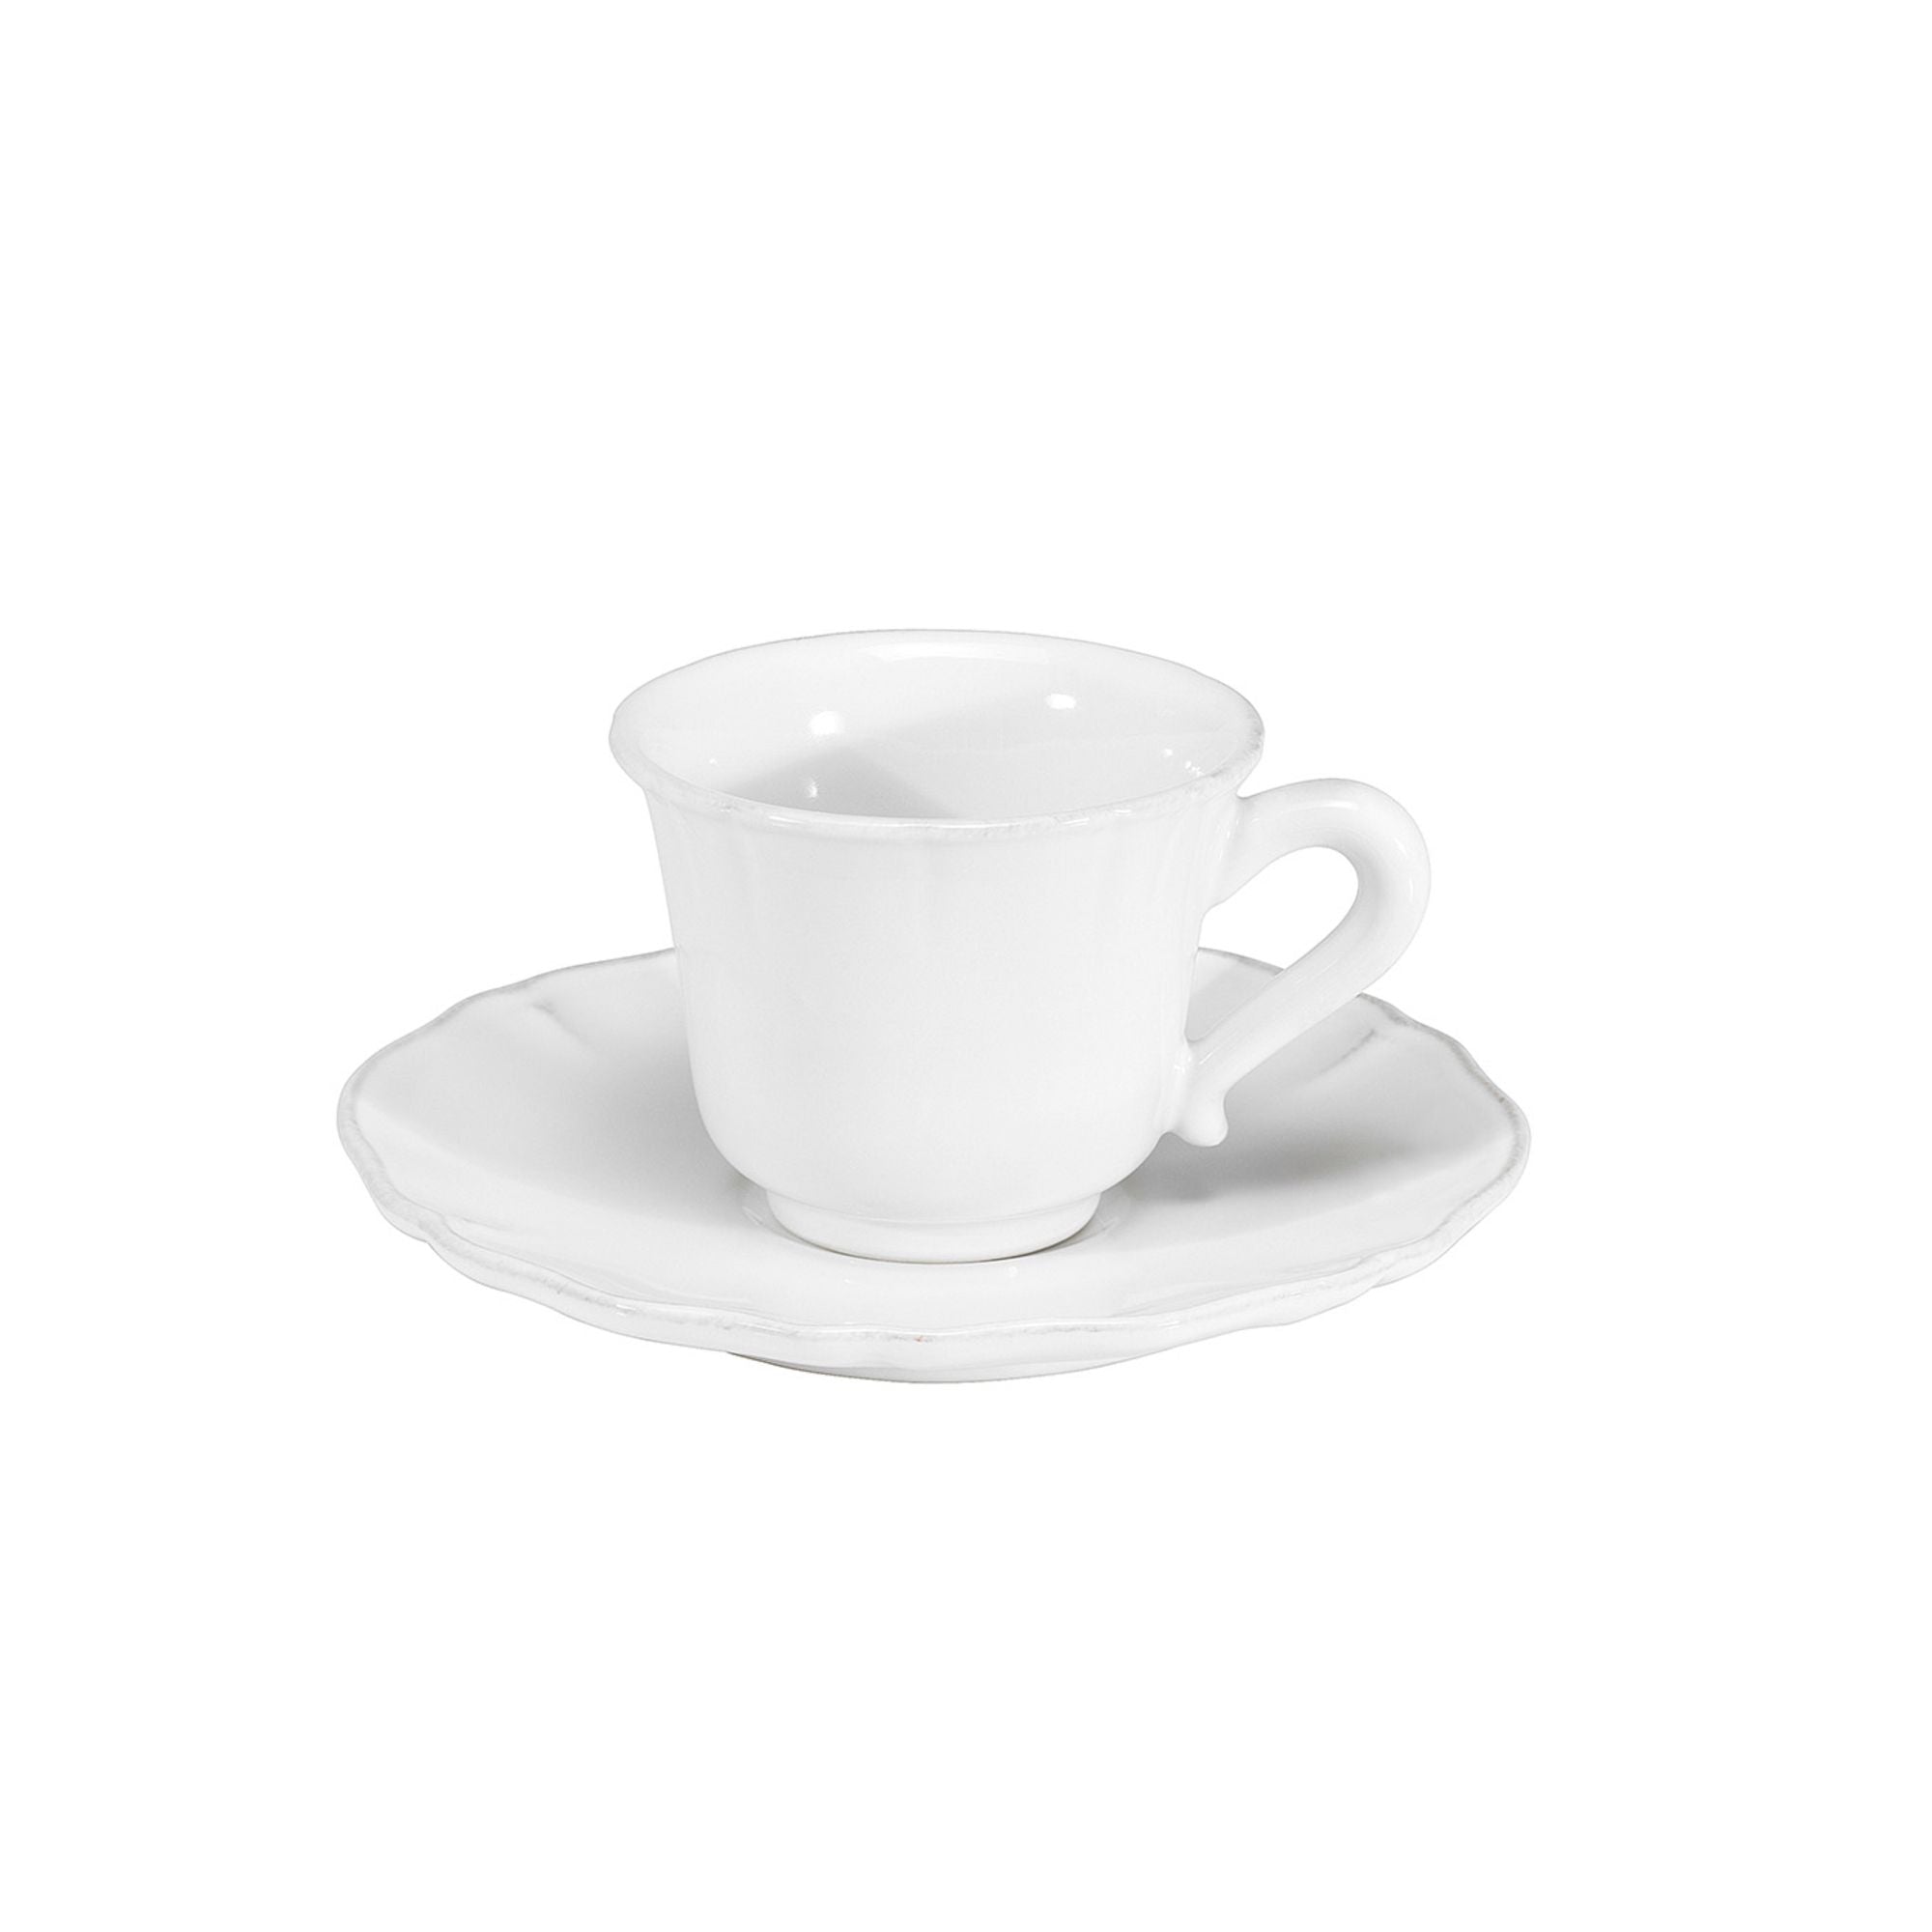 Alentejo Coffee Cup and Saucer 3 oz. White